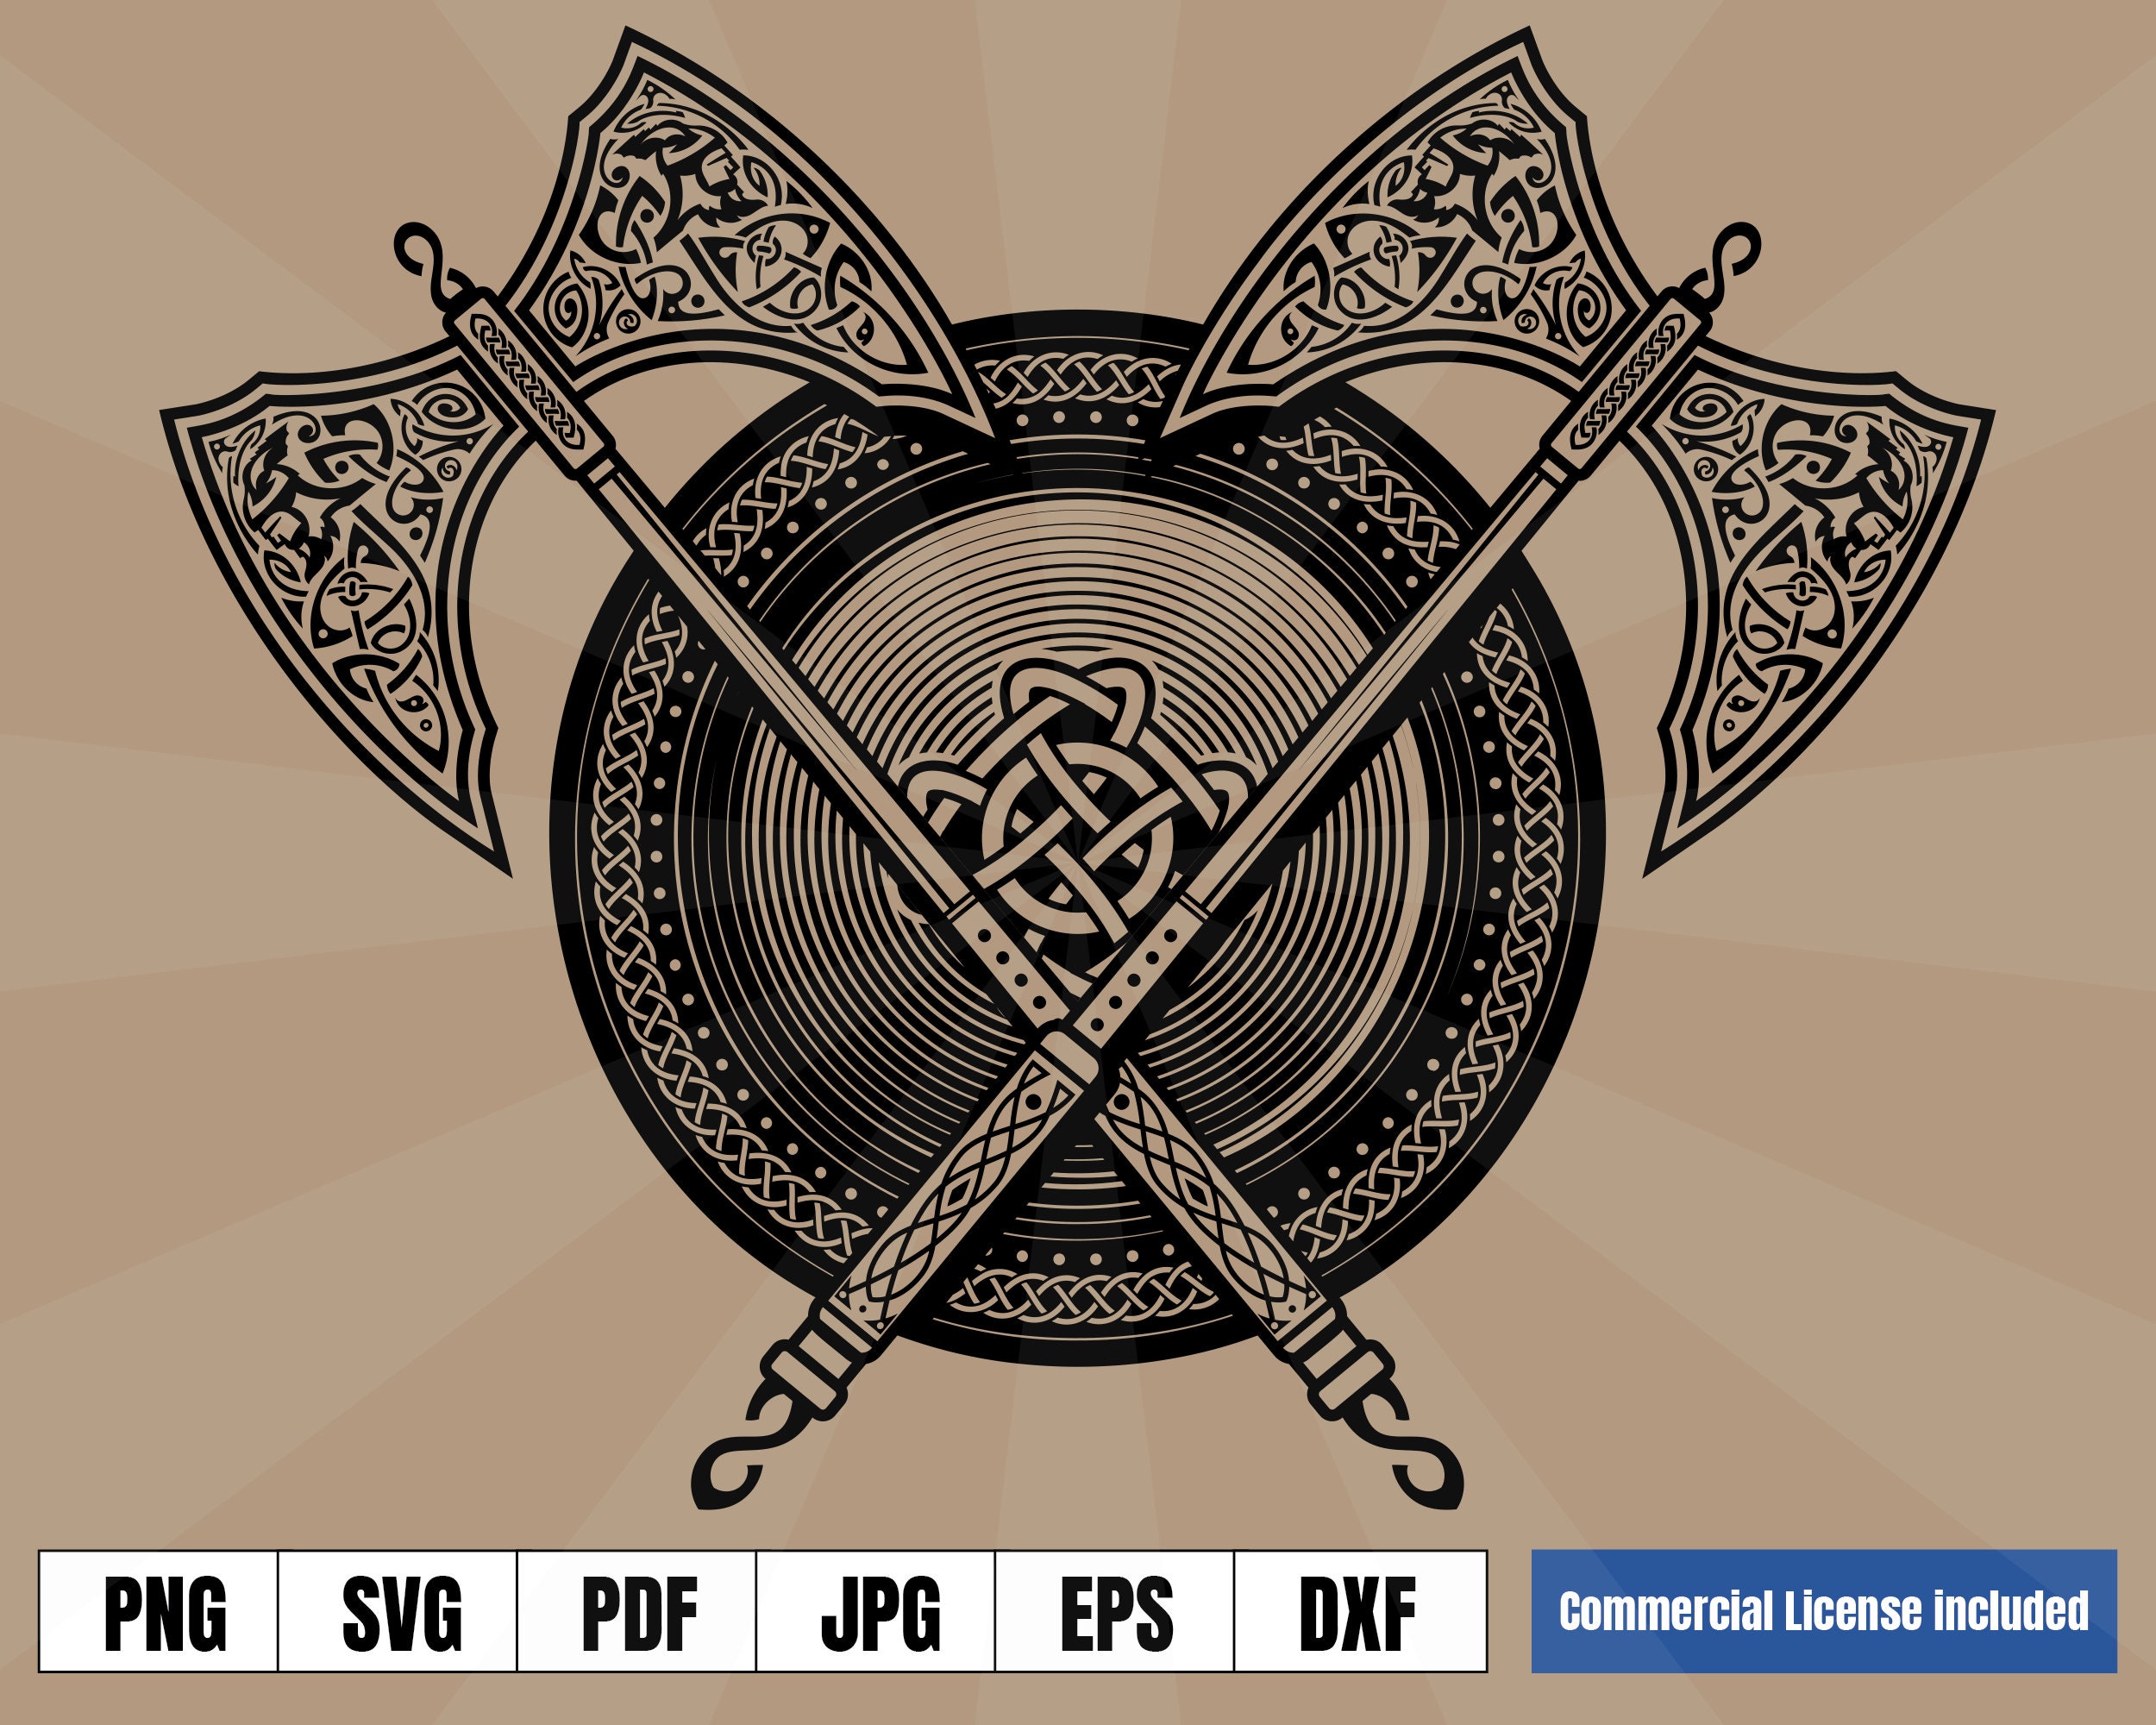 Viking Shield and Axes Coat of Arms Norse Tattoo Art Logo .svg | Etsy